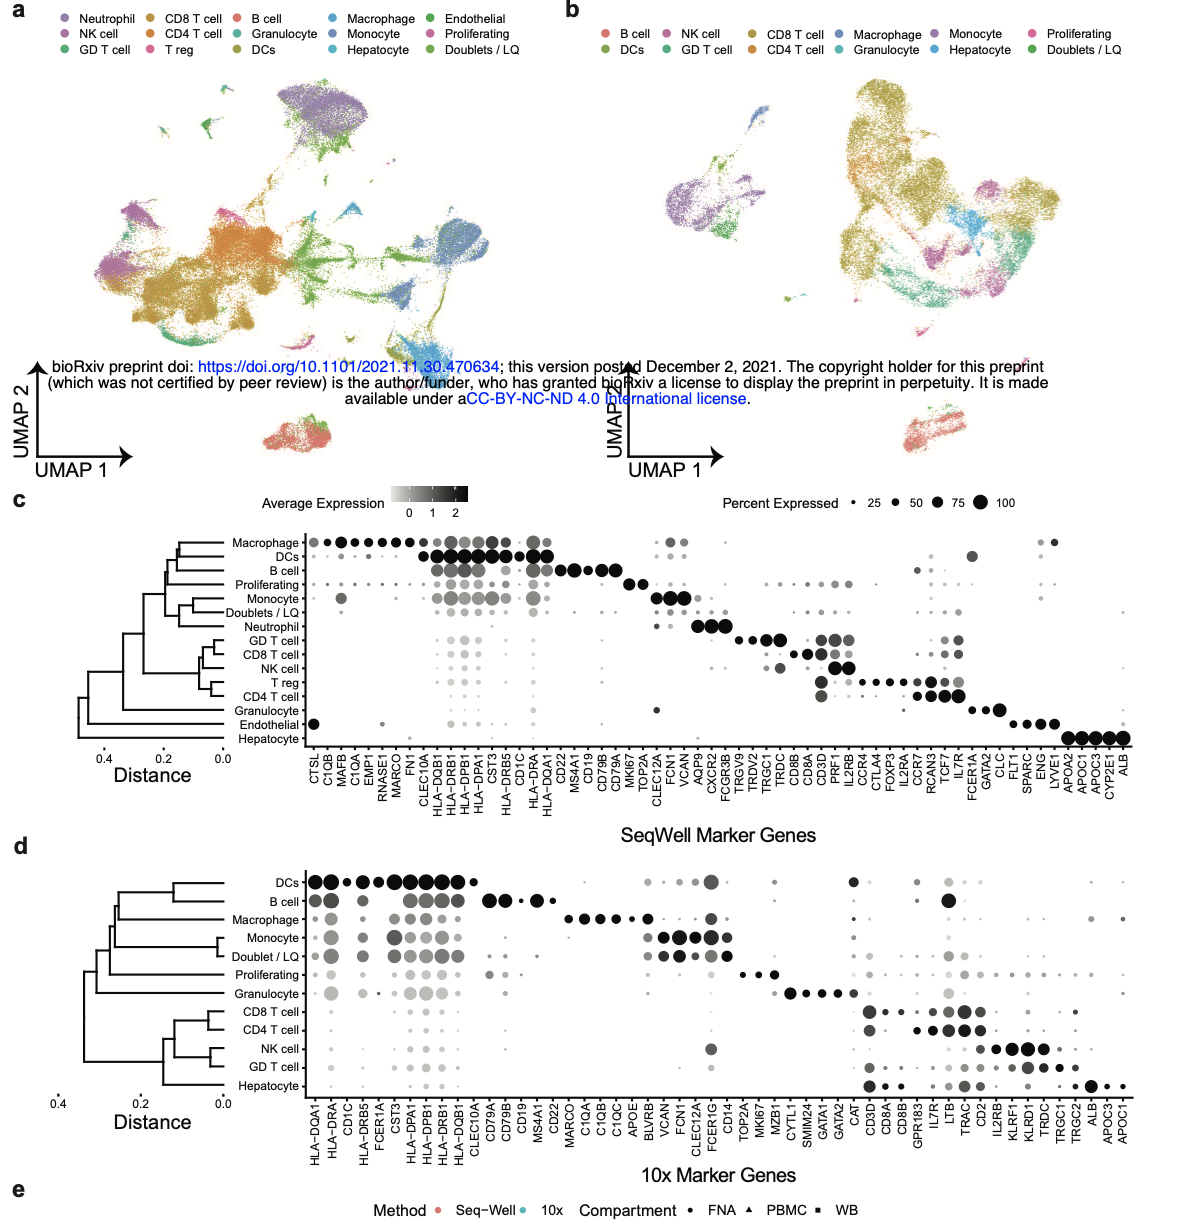 Clinical implementation of single-cell RNA sequencing using liver fine needle aspirate tissue sampling and centralized processing captures compartment specific immuno-diversity